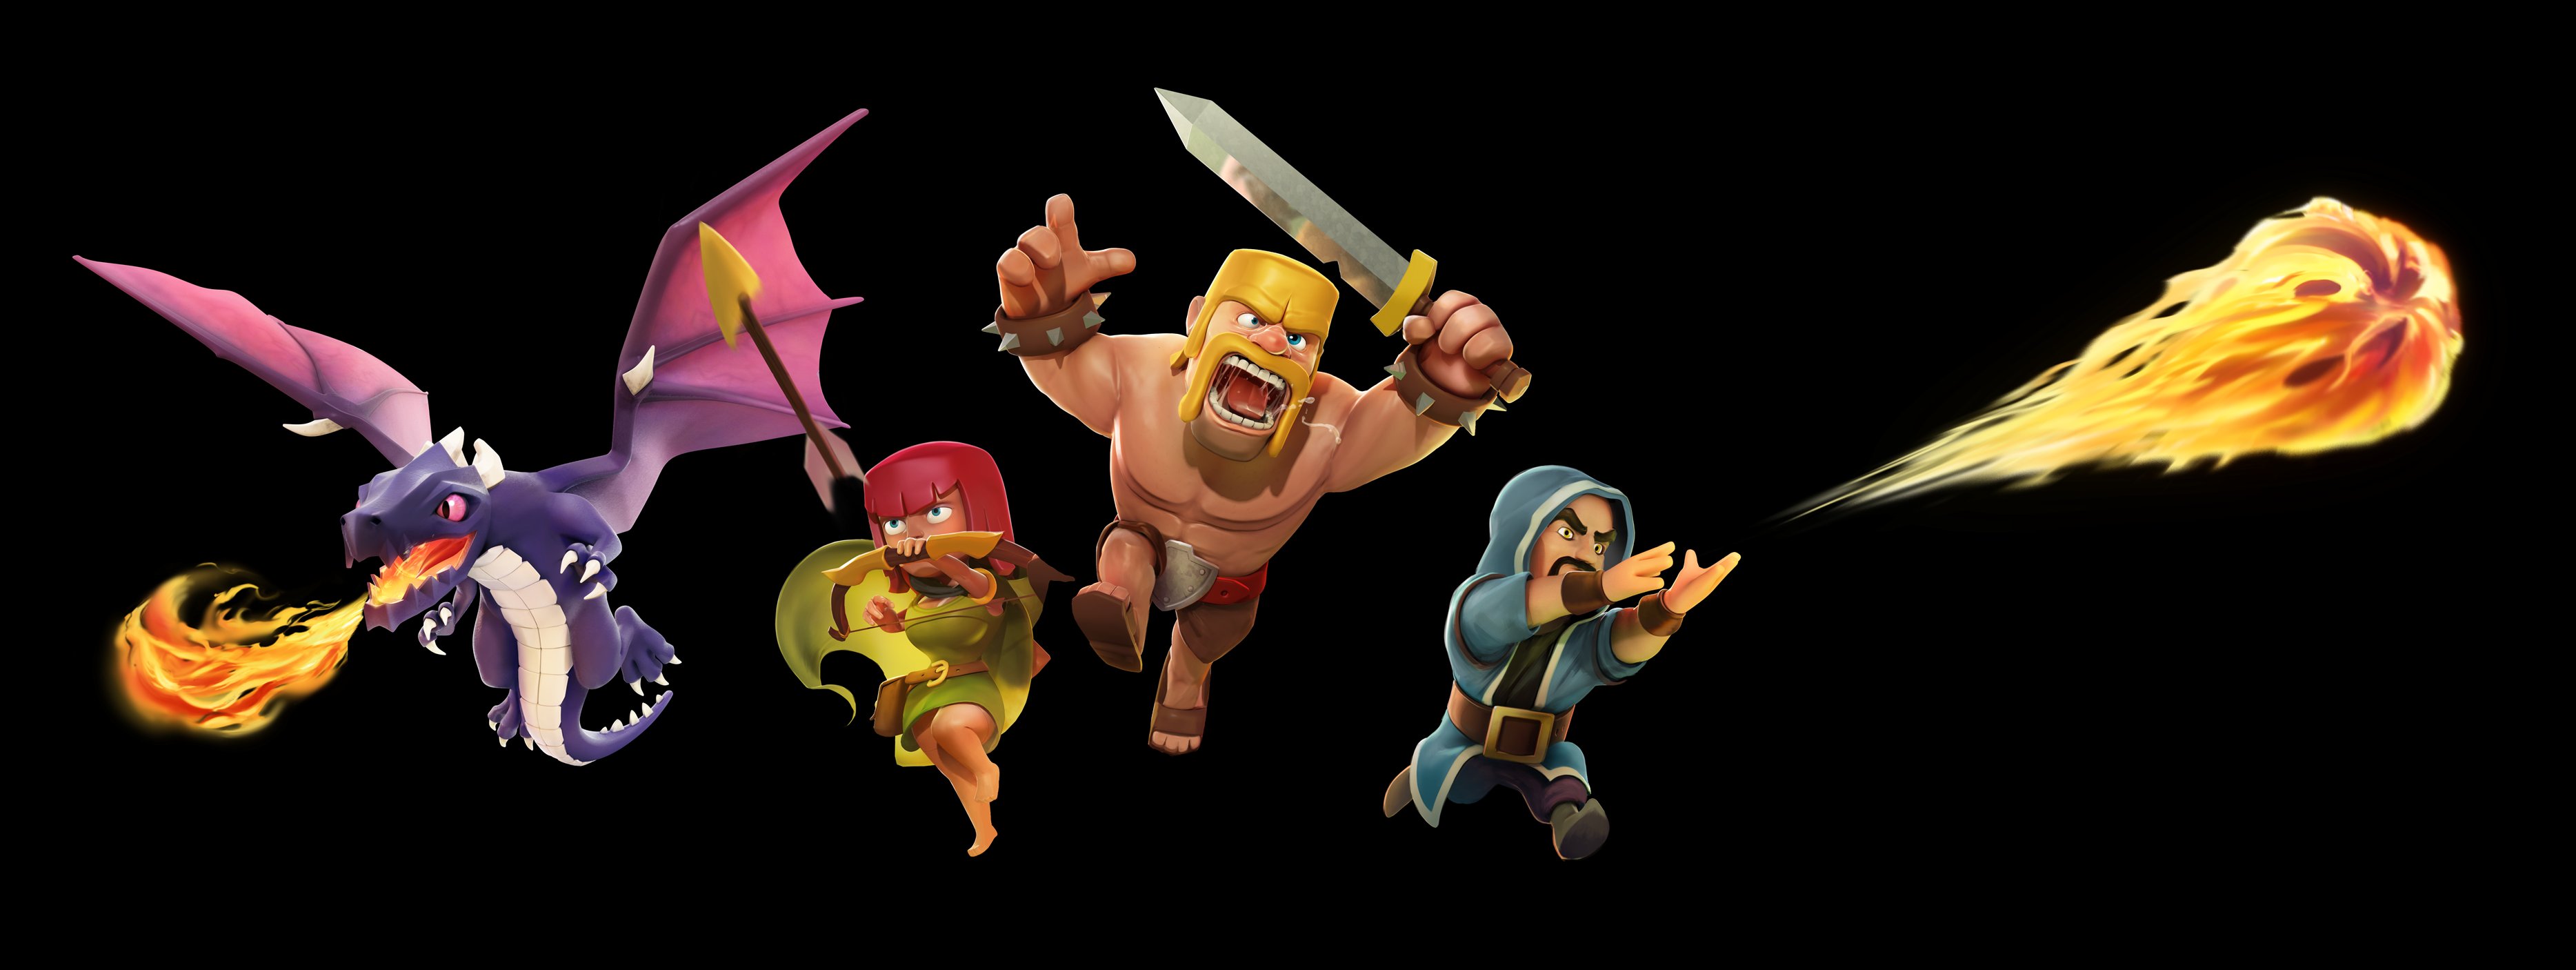 Video Game Clash Of Clans 3735x1406